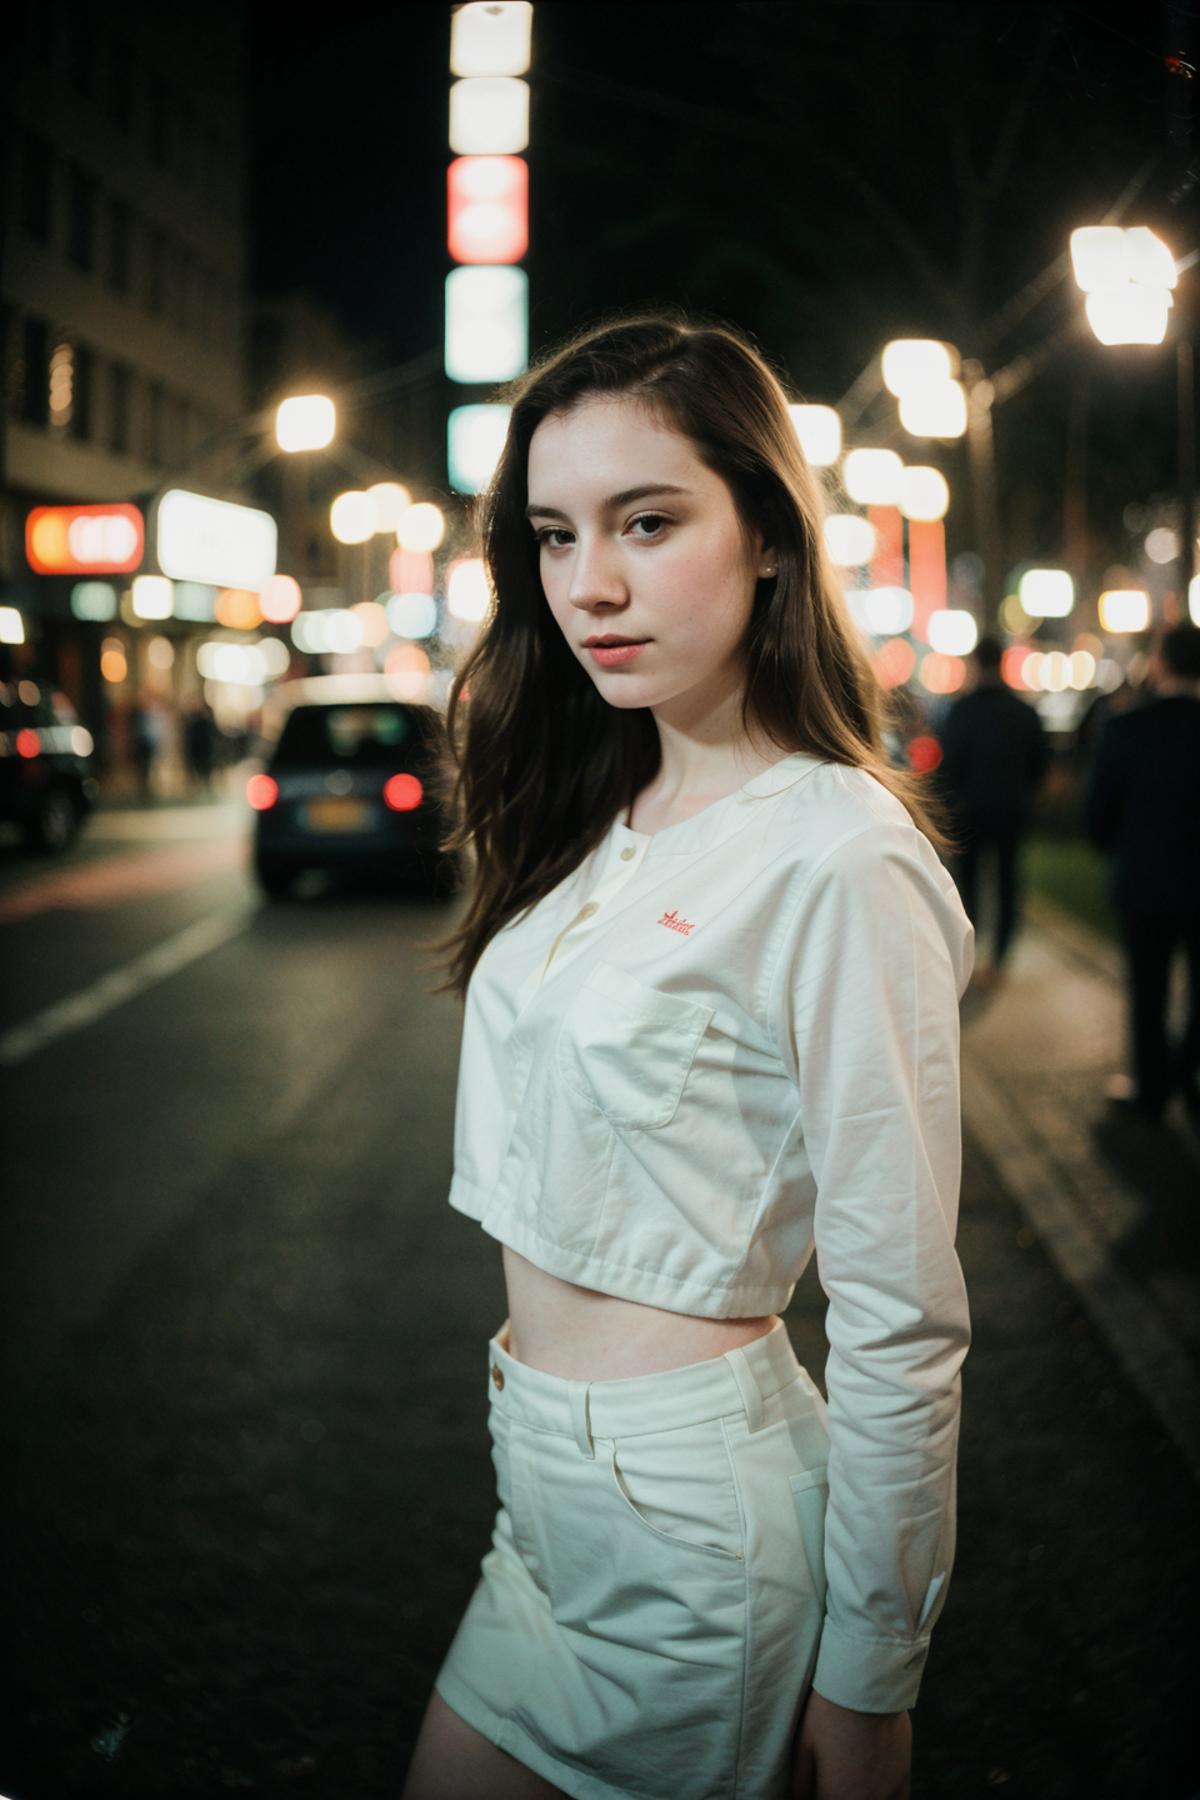 A young woman wearing white clothing standing on a street.